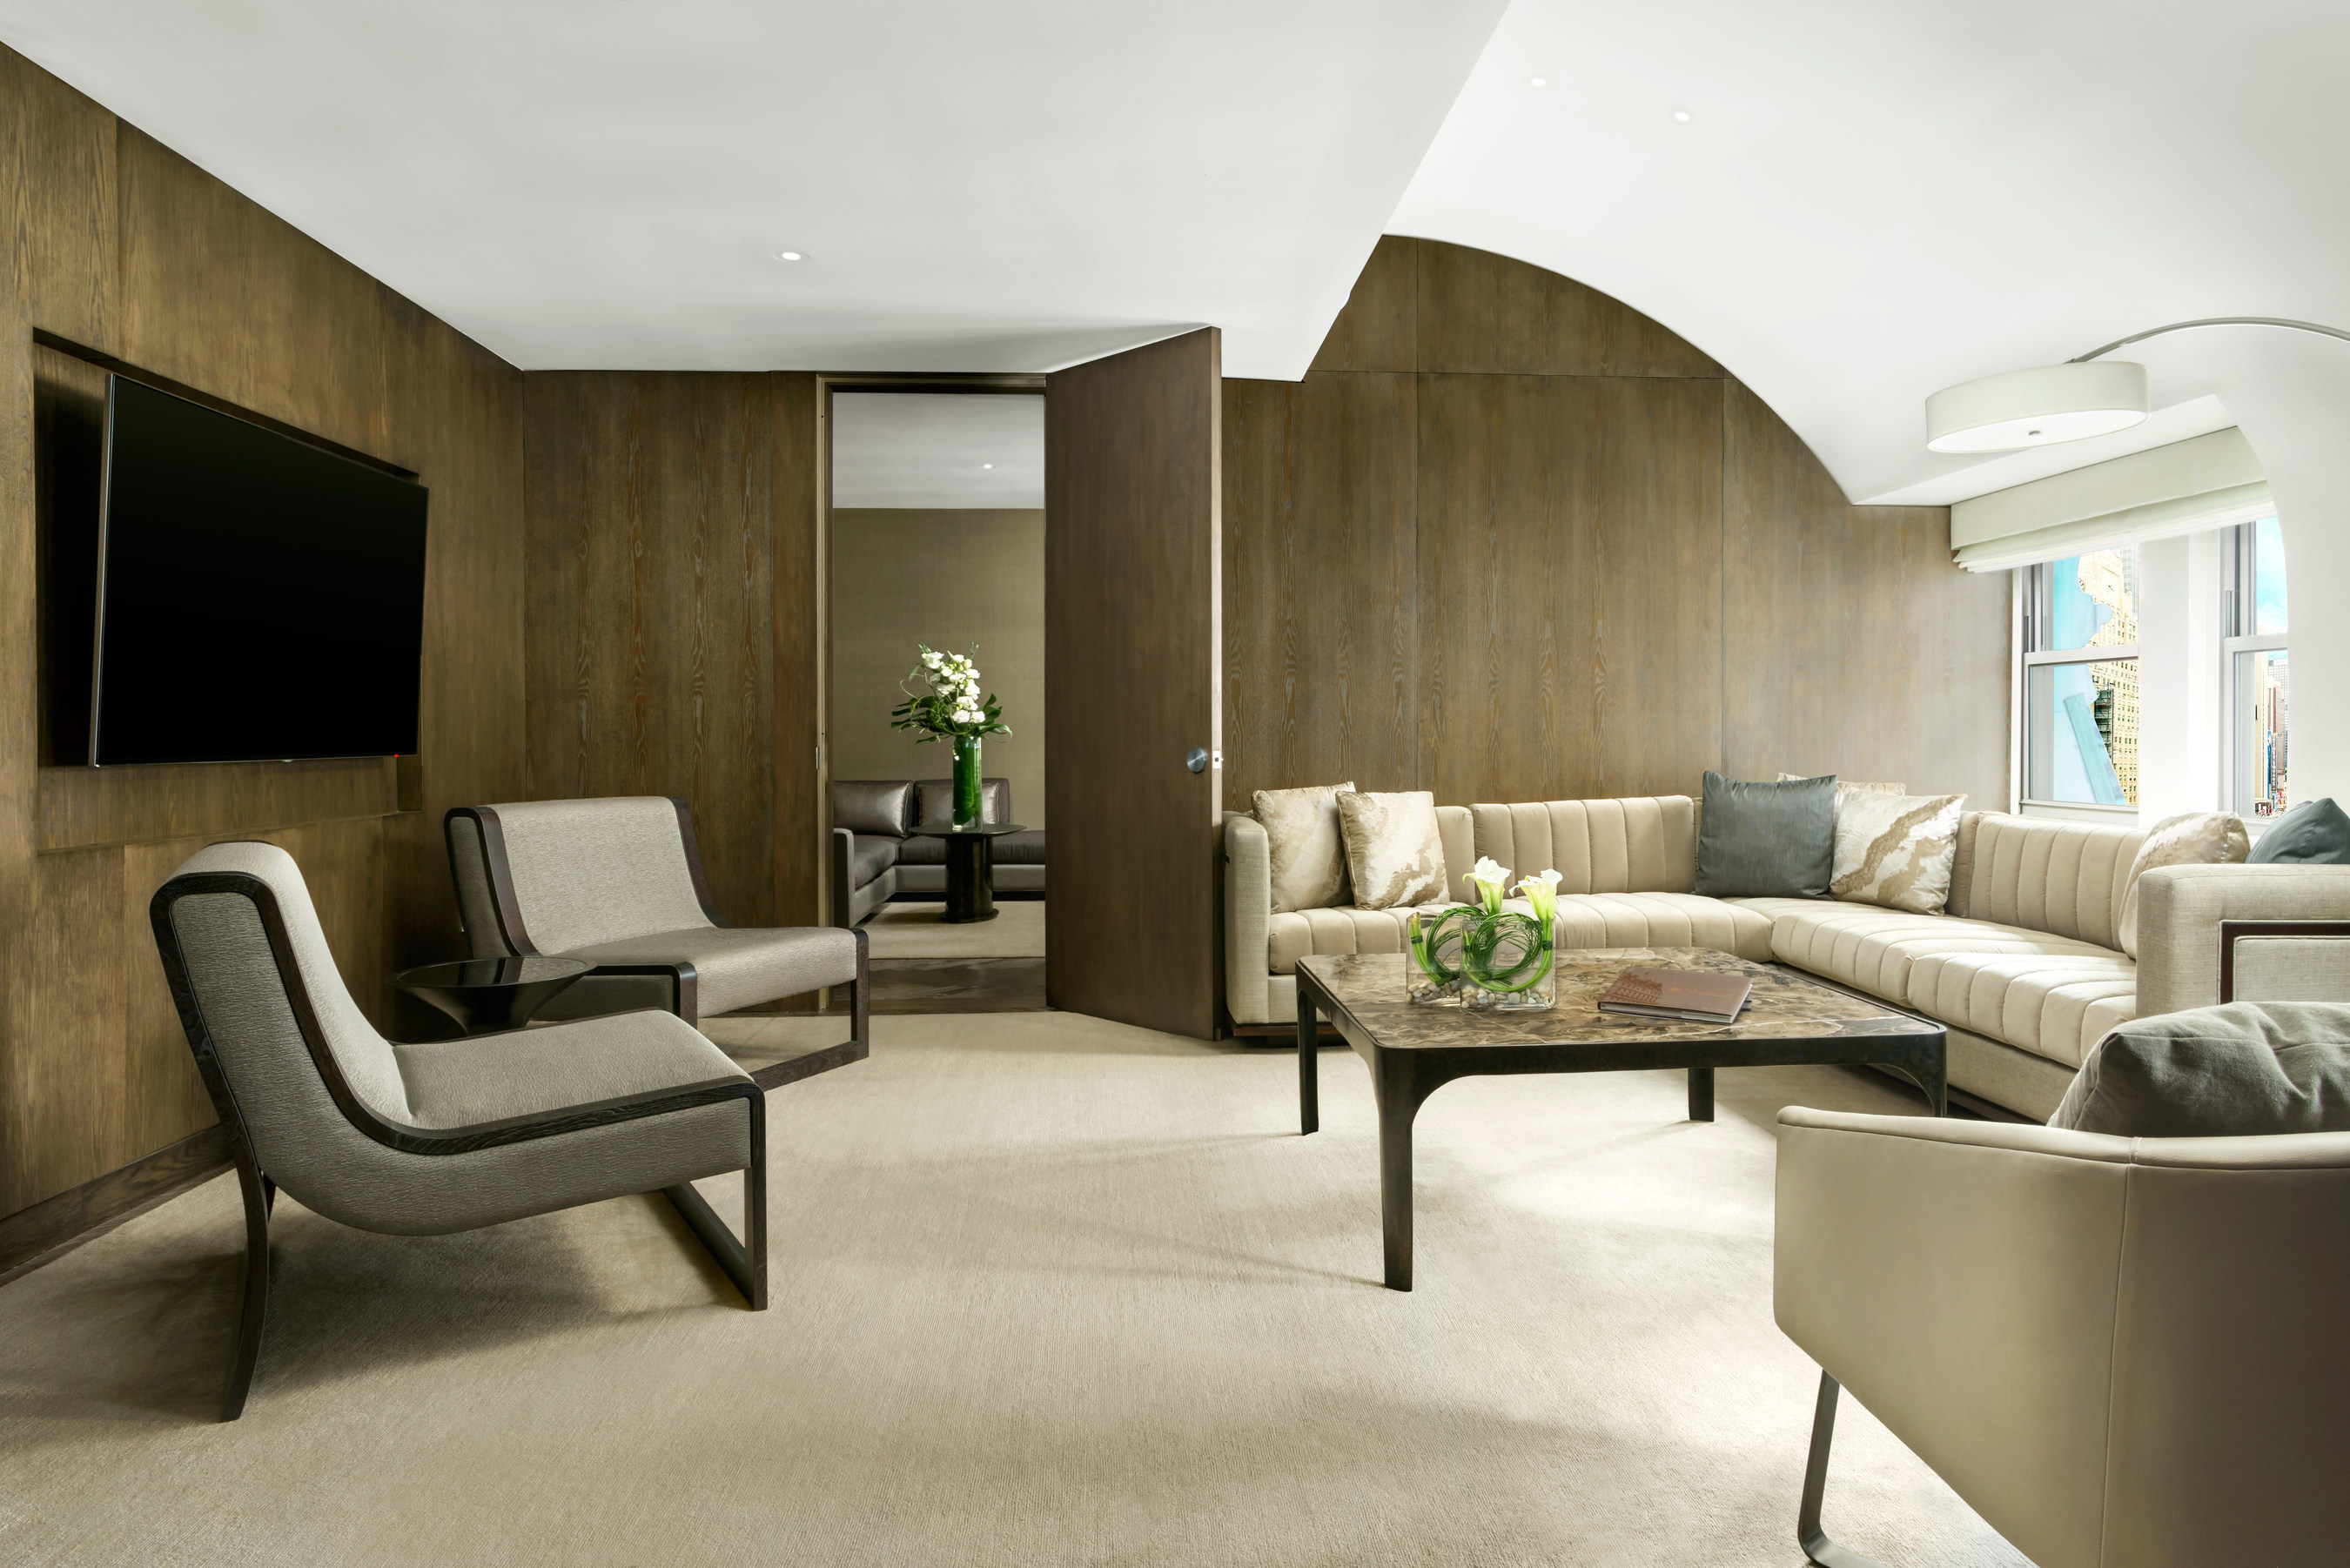 The Caruso Suite at The Knickerbocker Hotel, designed by Gabellini Sheppard Associates